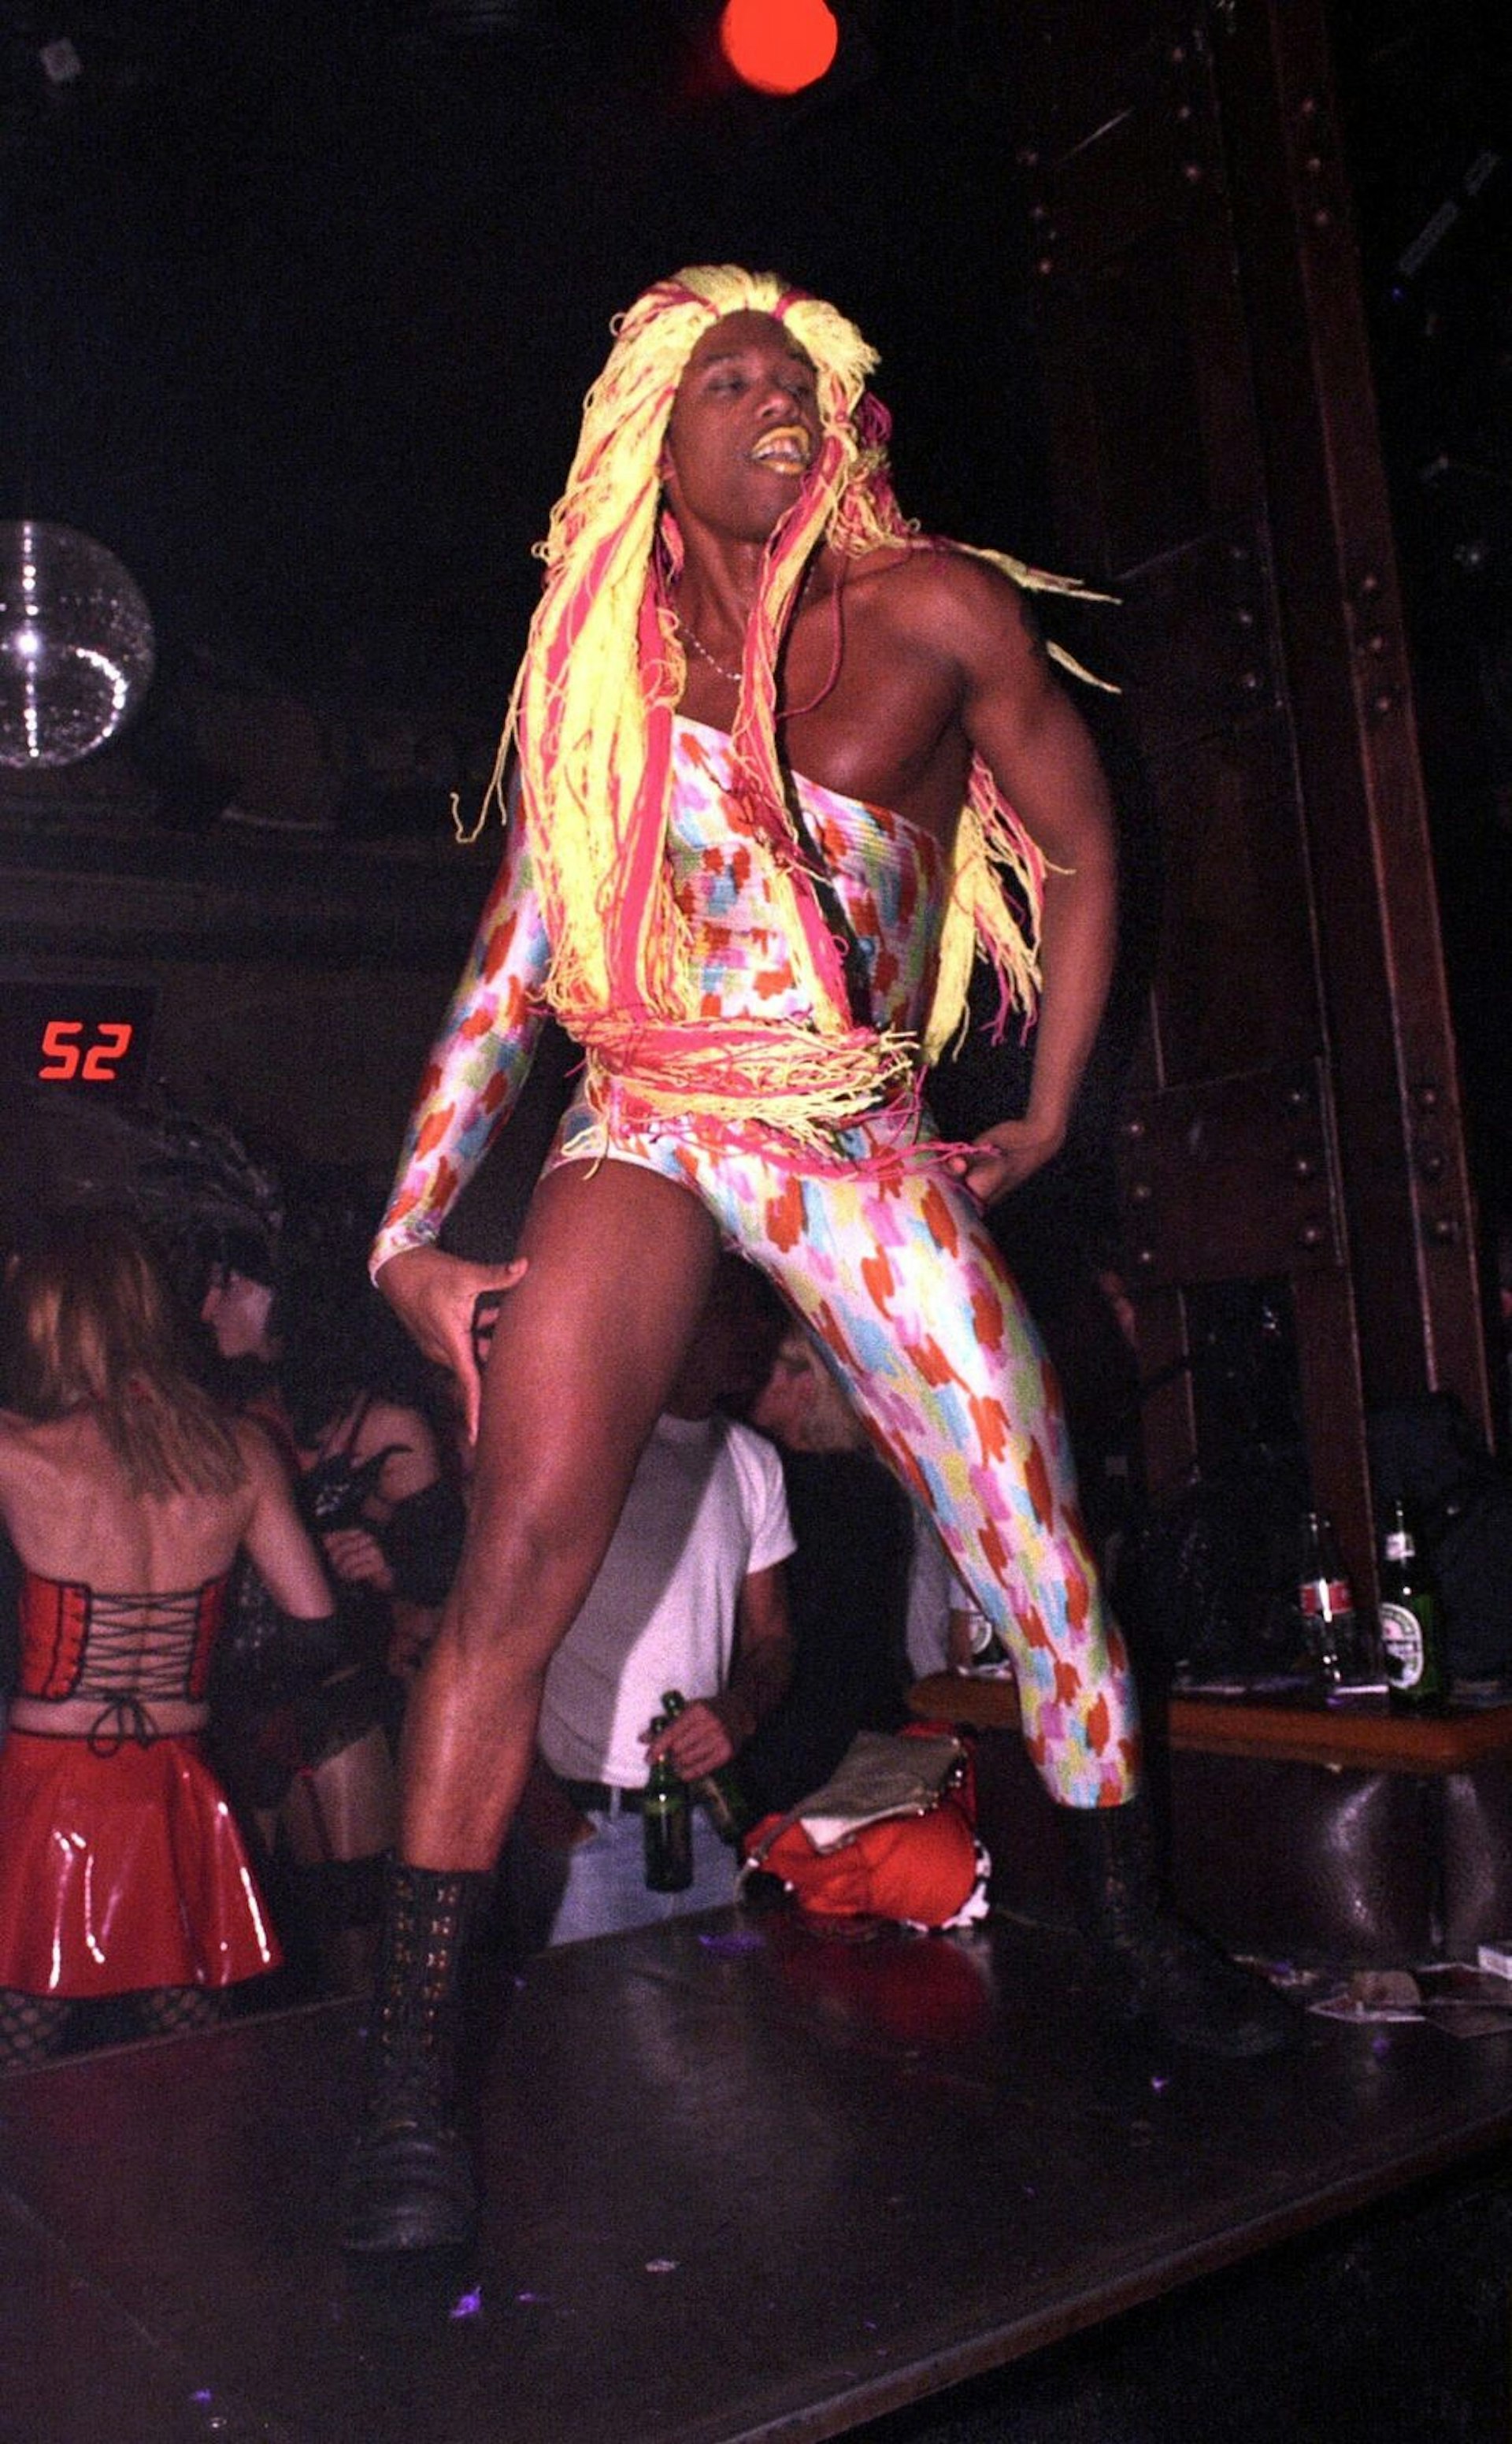 Berlin clubs - a Sage Club gogo dancer dances on stage wearing a multi-coloured leotard with one arm and one leg as well as a blonde wig with pink streaks